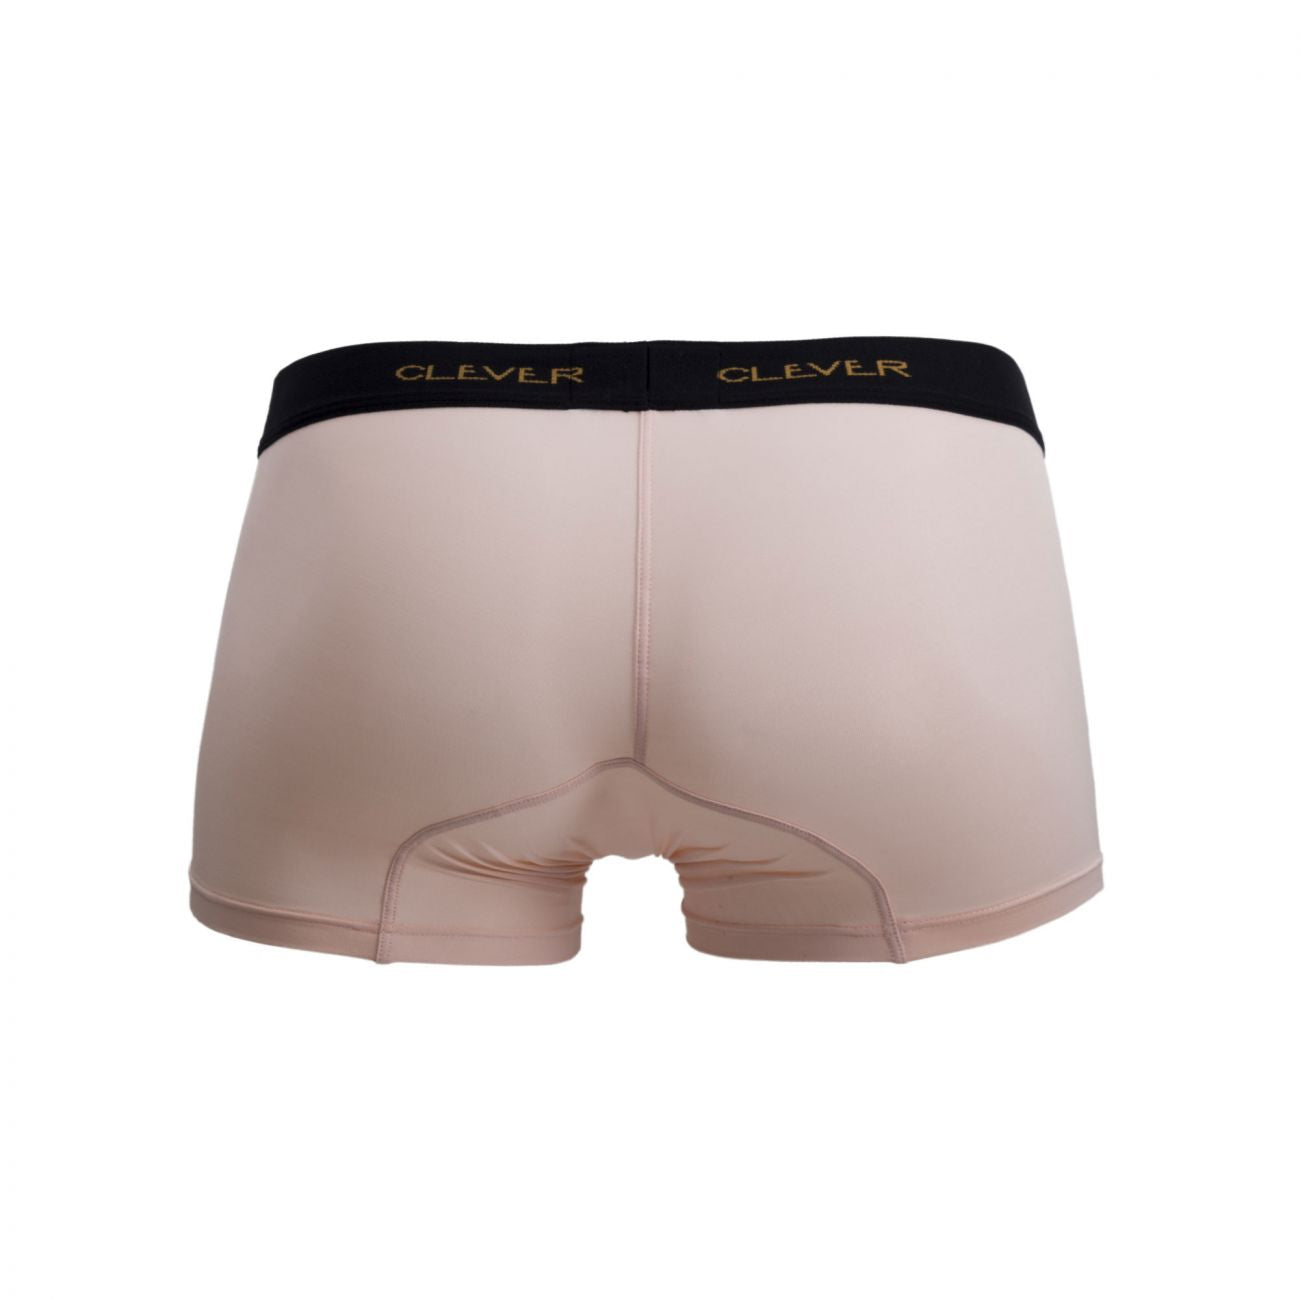 Clever 2199 Limited Edition Boxer Briefs Trunks Pink